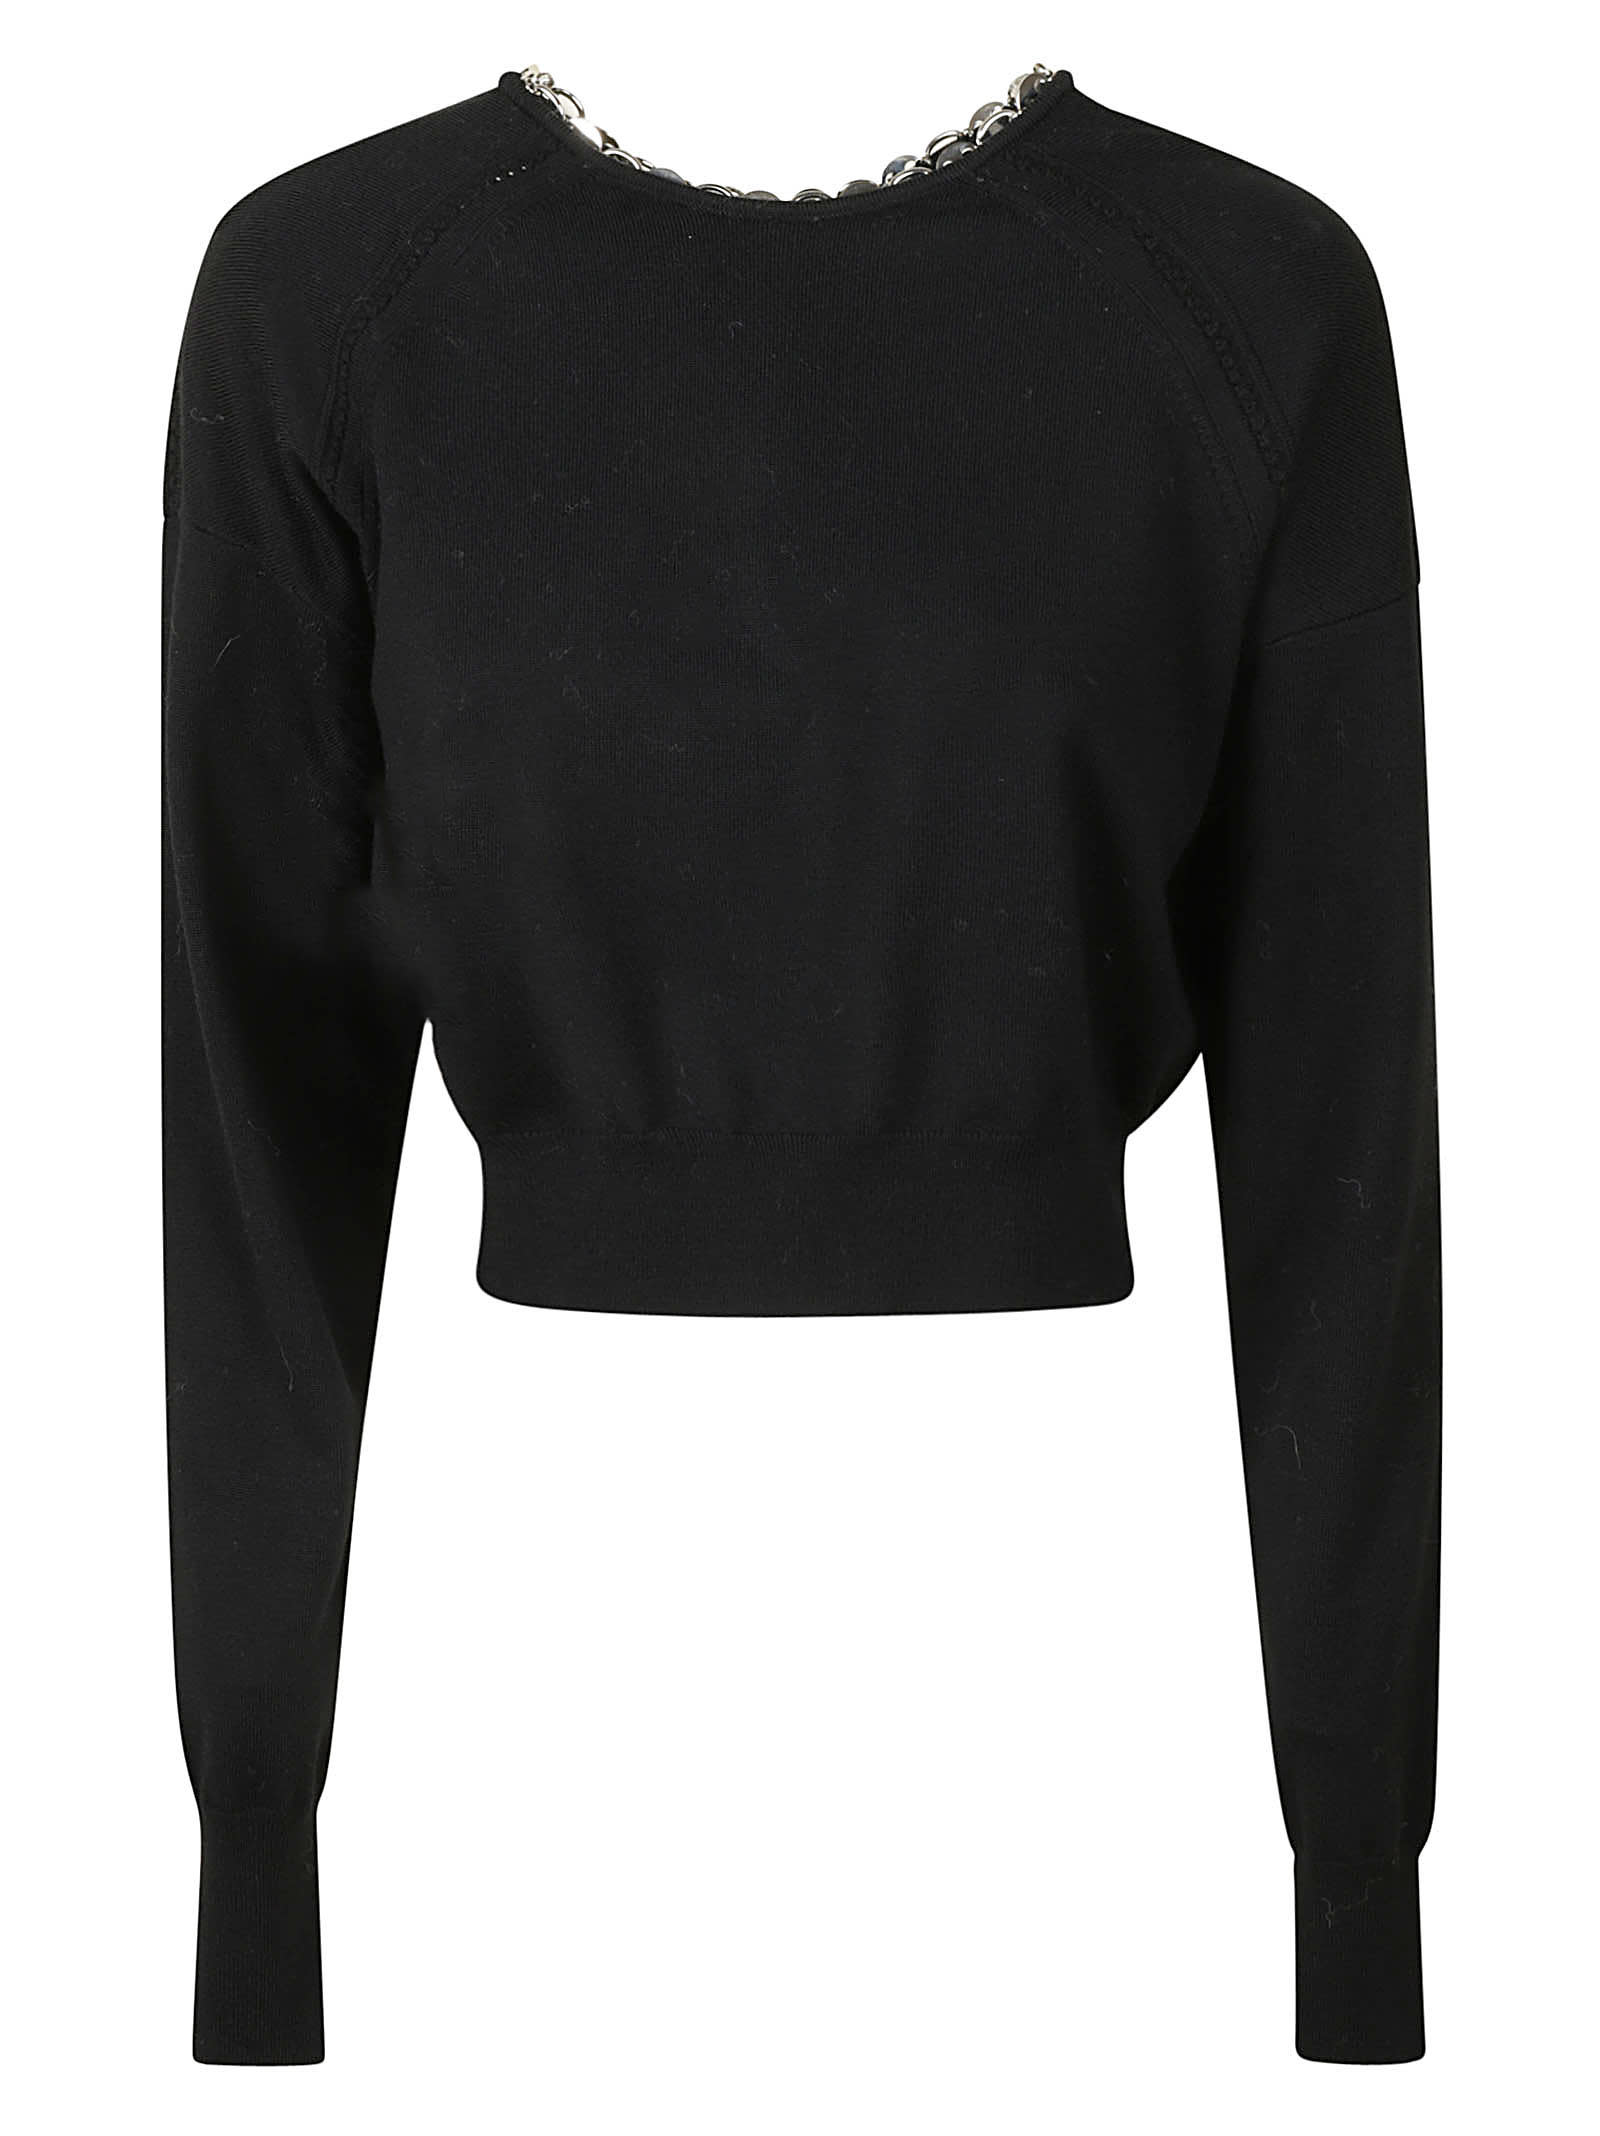 Paco Rabanne Chain Applique Cropped Rib Sweater